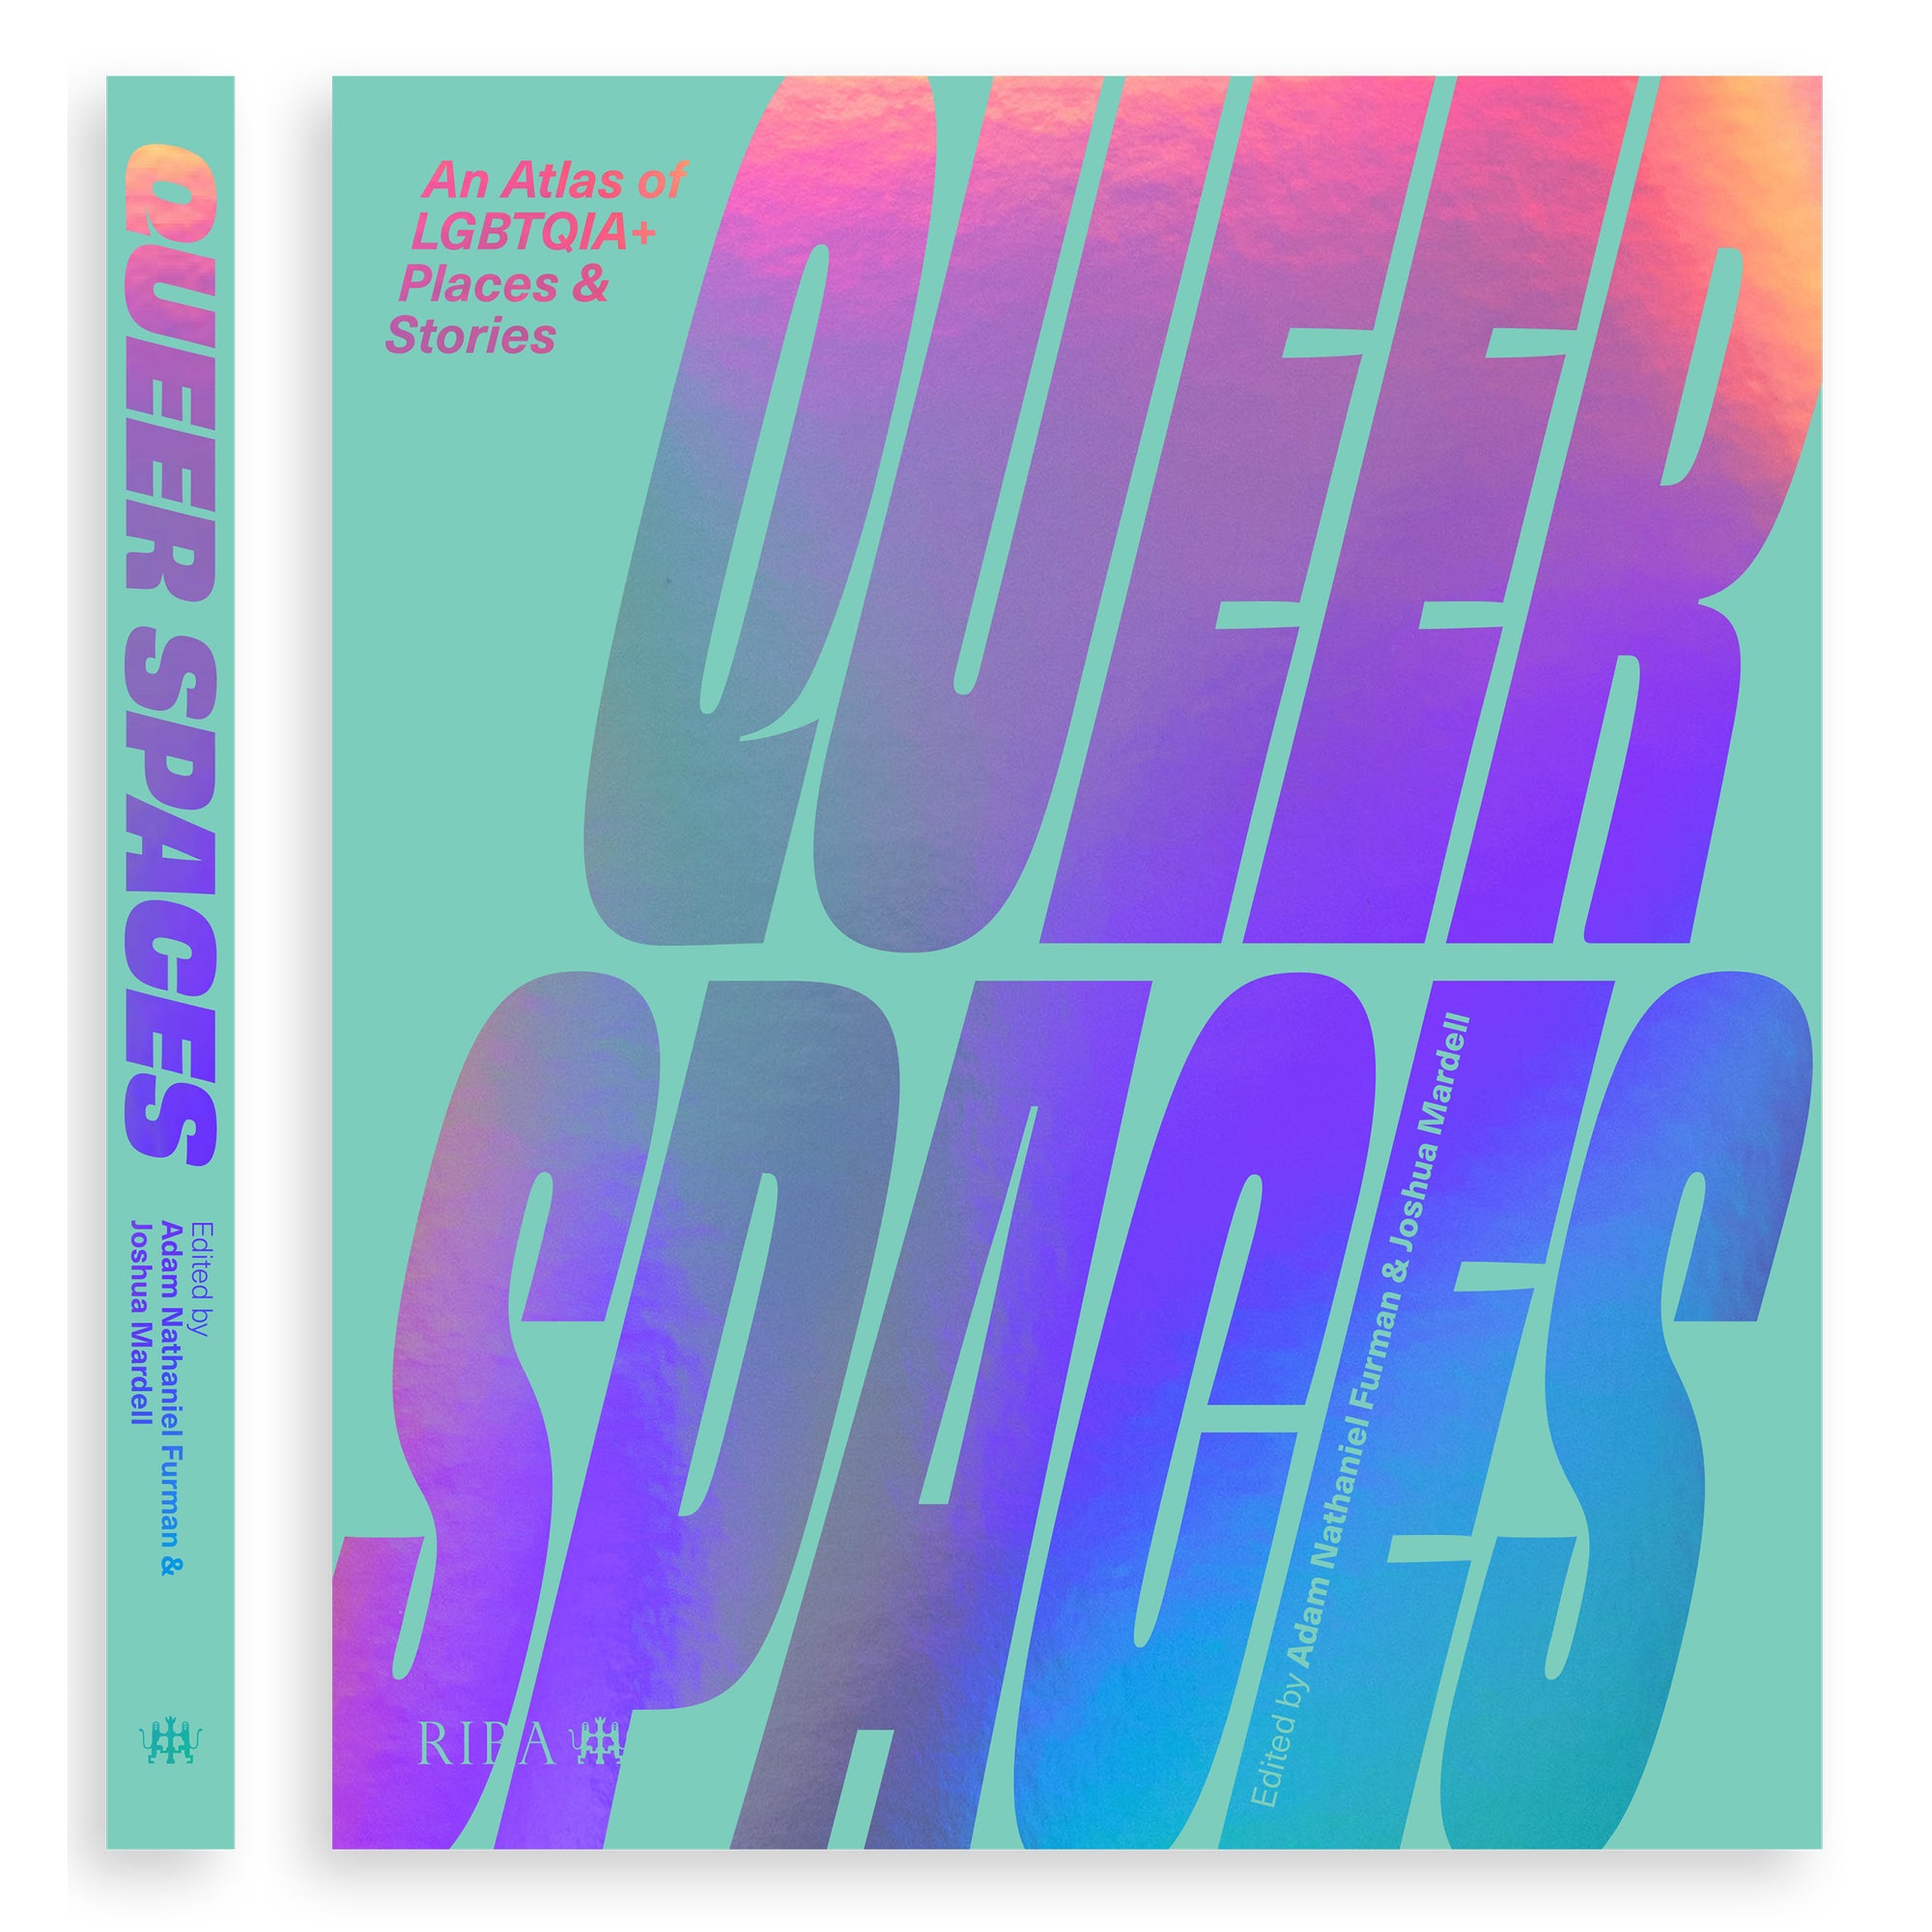 Queer Spaces, book for the RIBA Royal Institute of Architects by Adam Nathaniel Furman